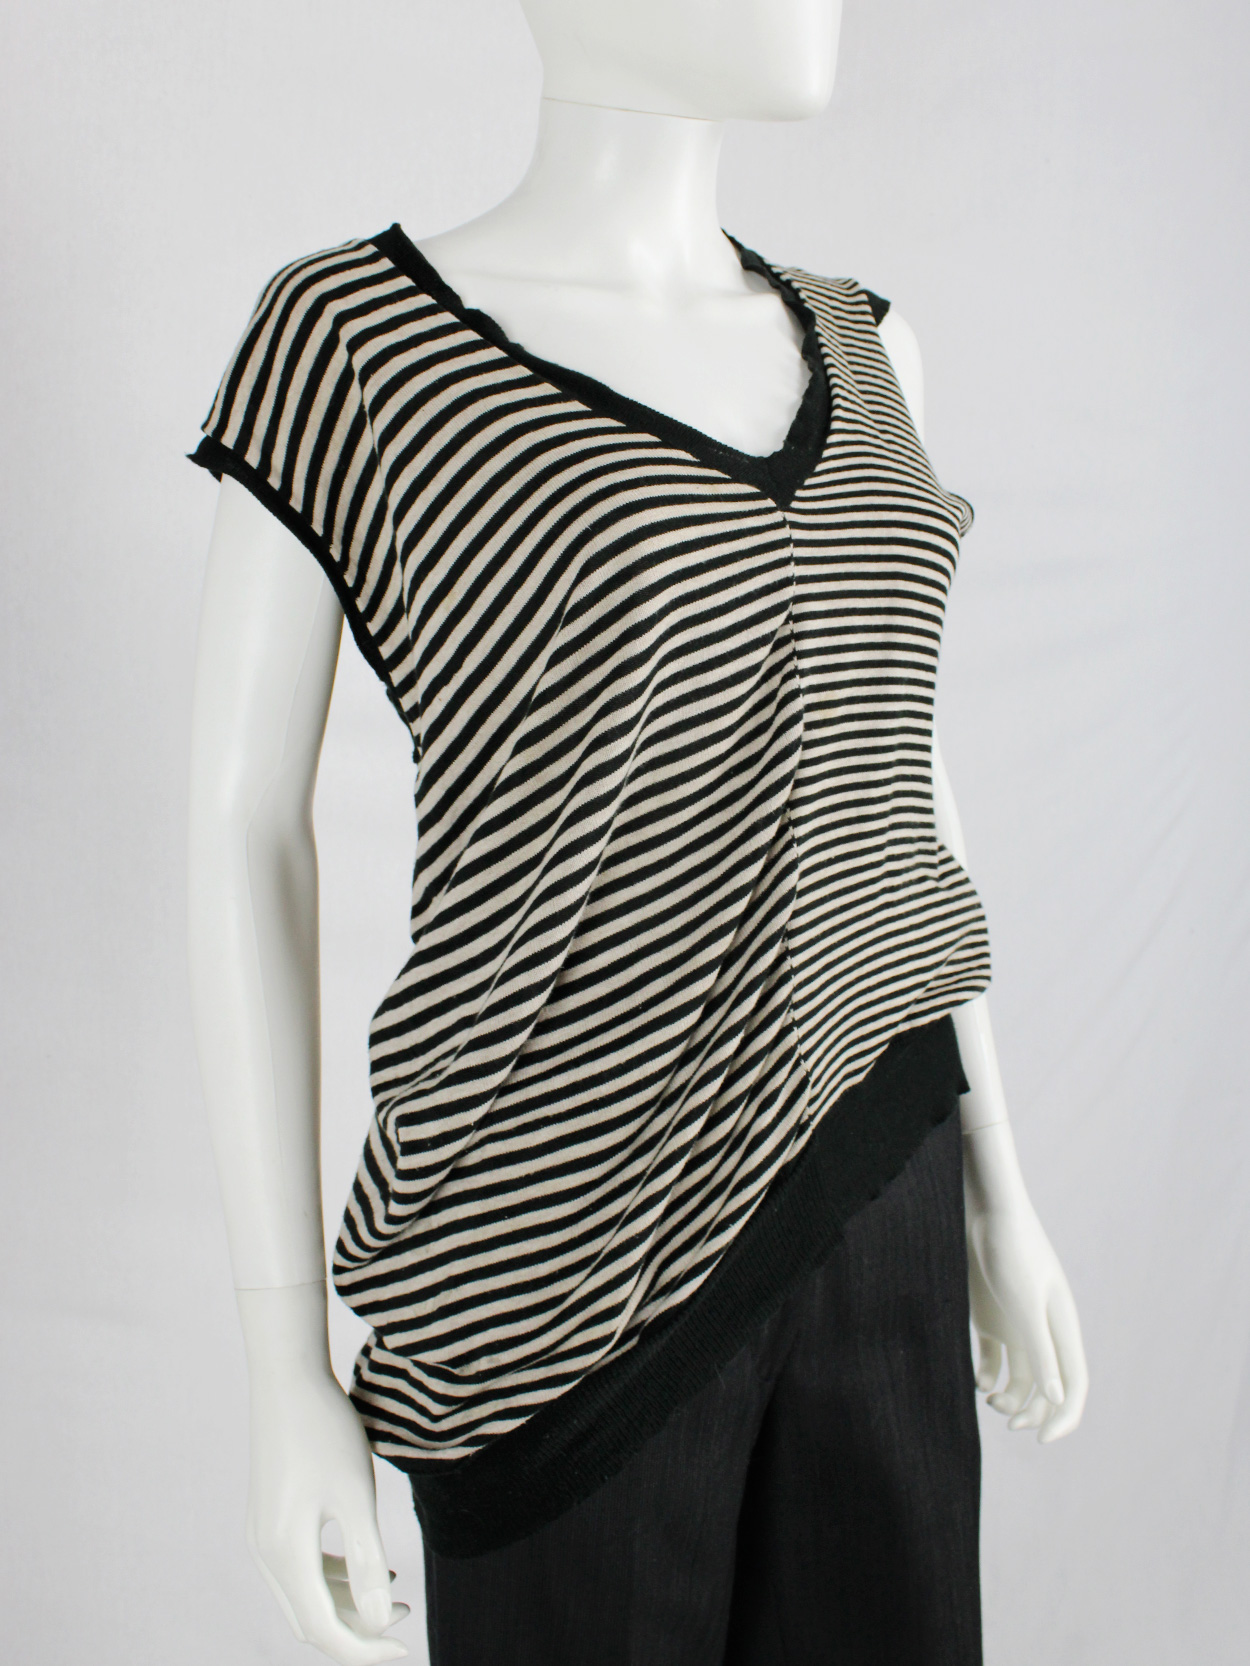 Maison Martin Margiela beige and black striped top, stretched out on ...